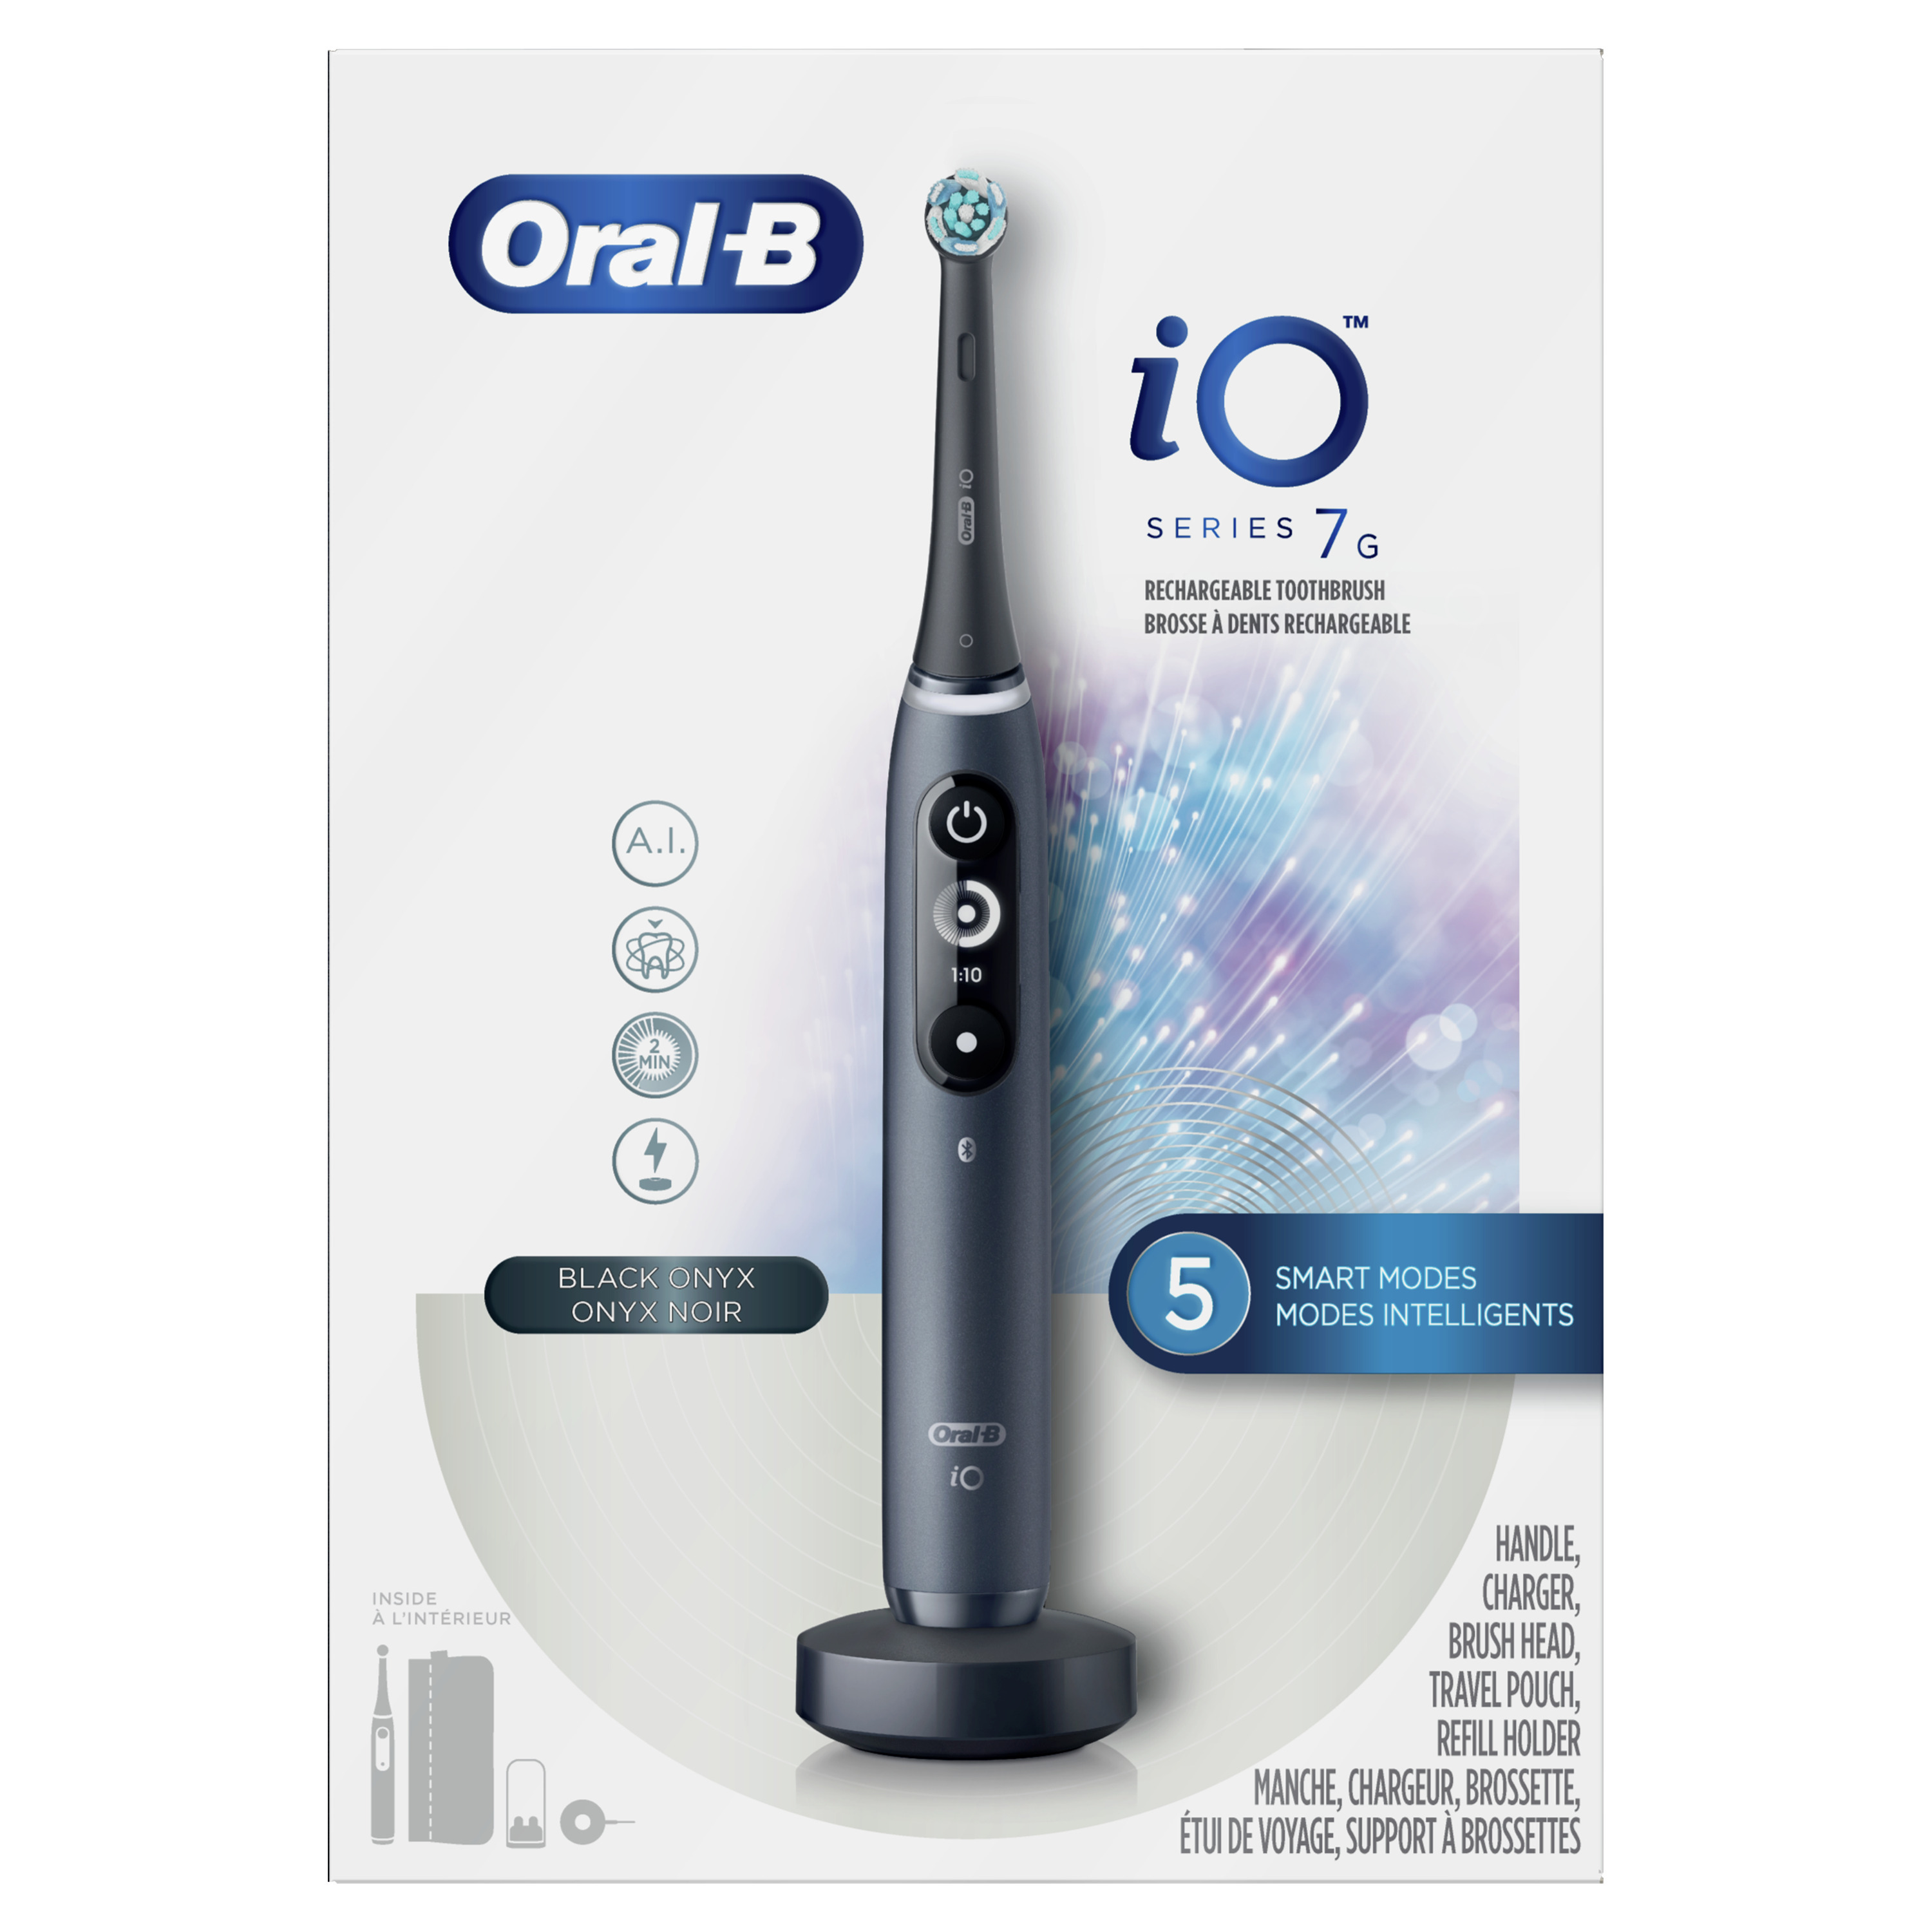 Oral-B iO Series 7G Electric Toothbrush with 1 Brush Head, Black Onyx - image 2 of 10